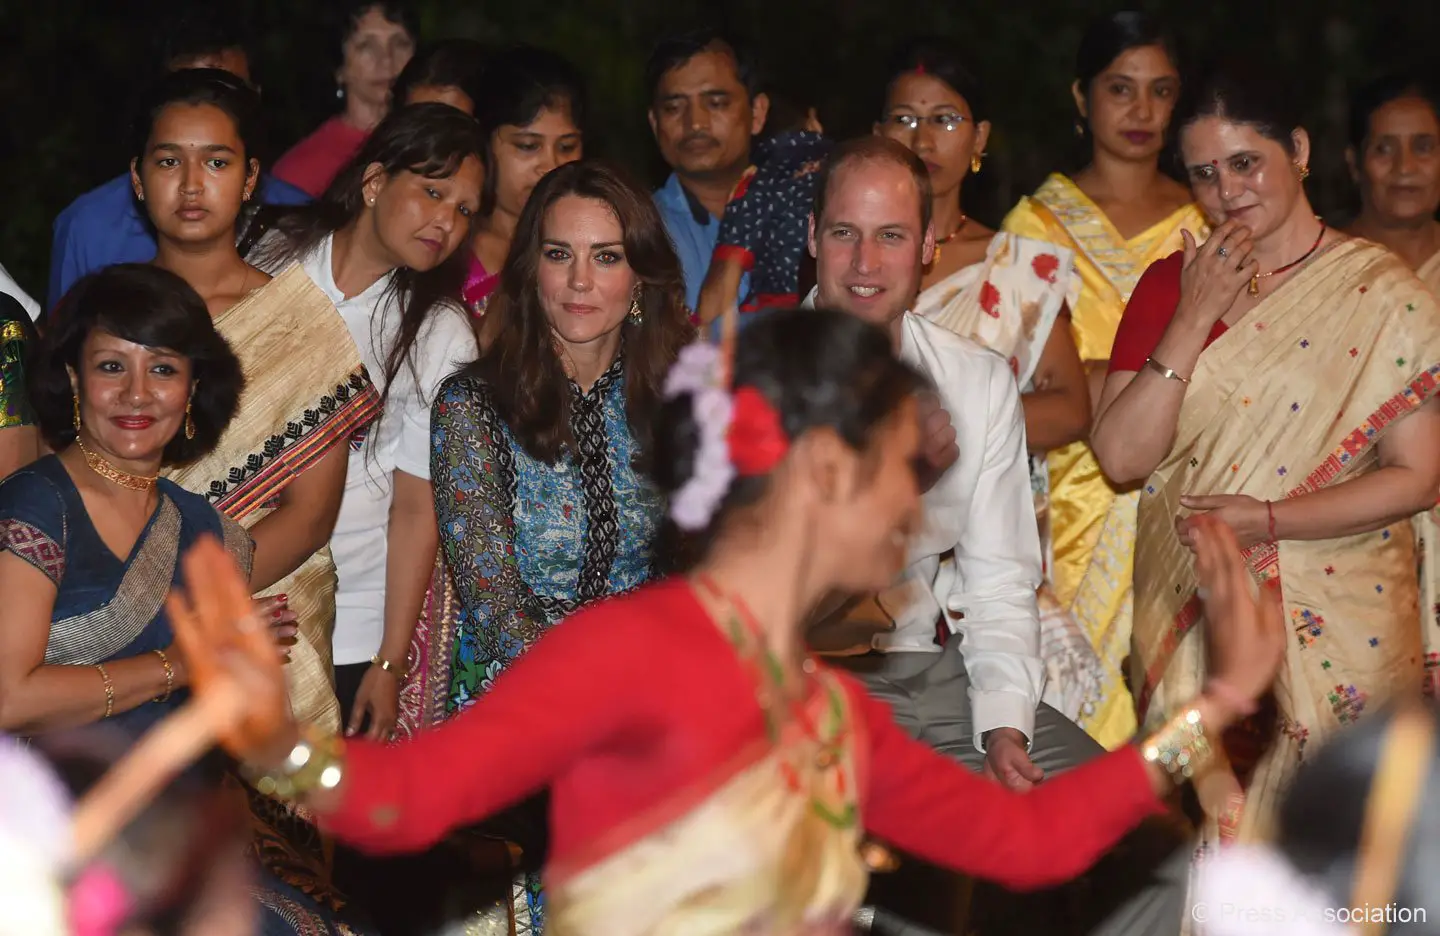 Around a campfire, the Duke and Duchess met local people and enjoyed dance and musical performances